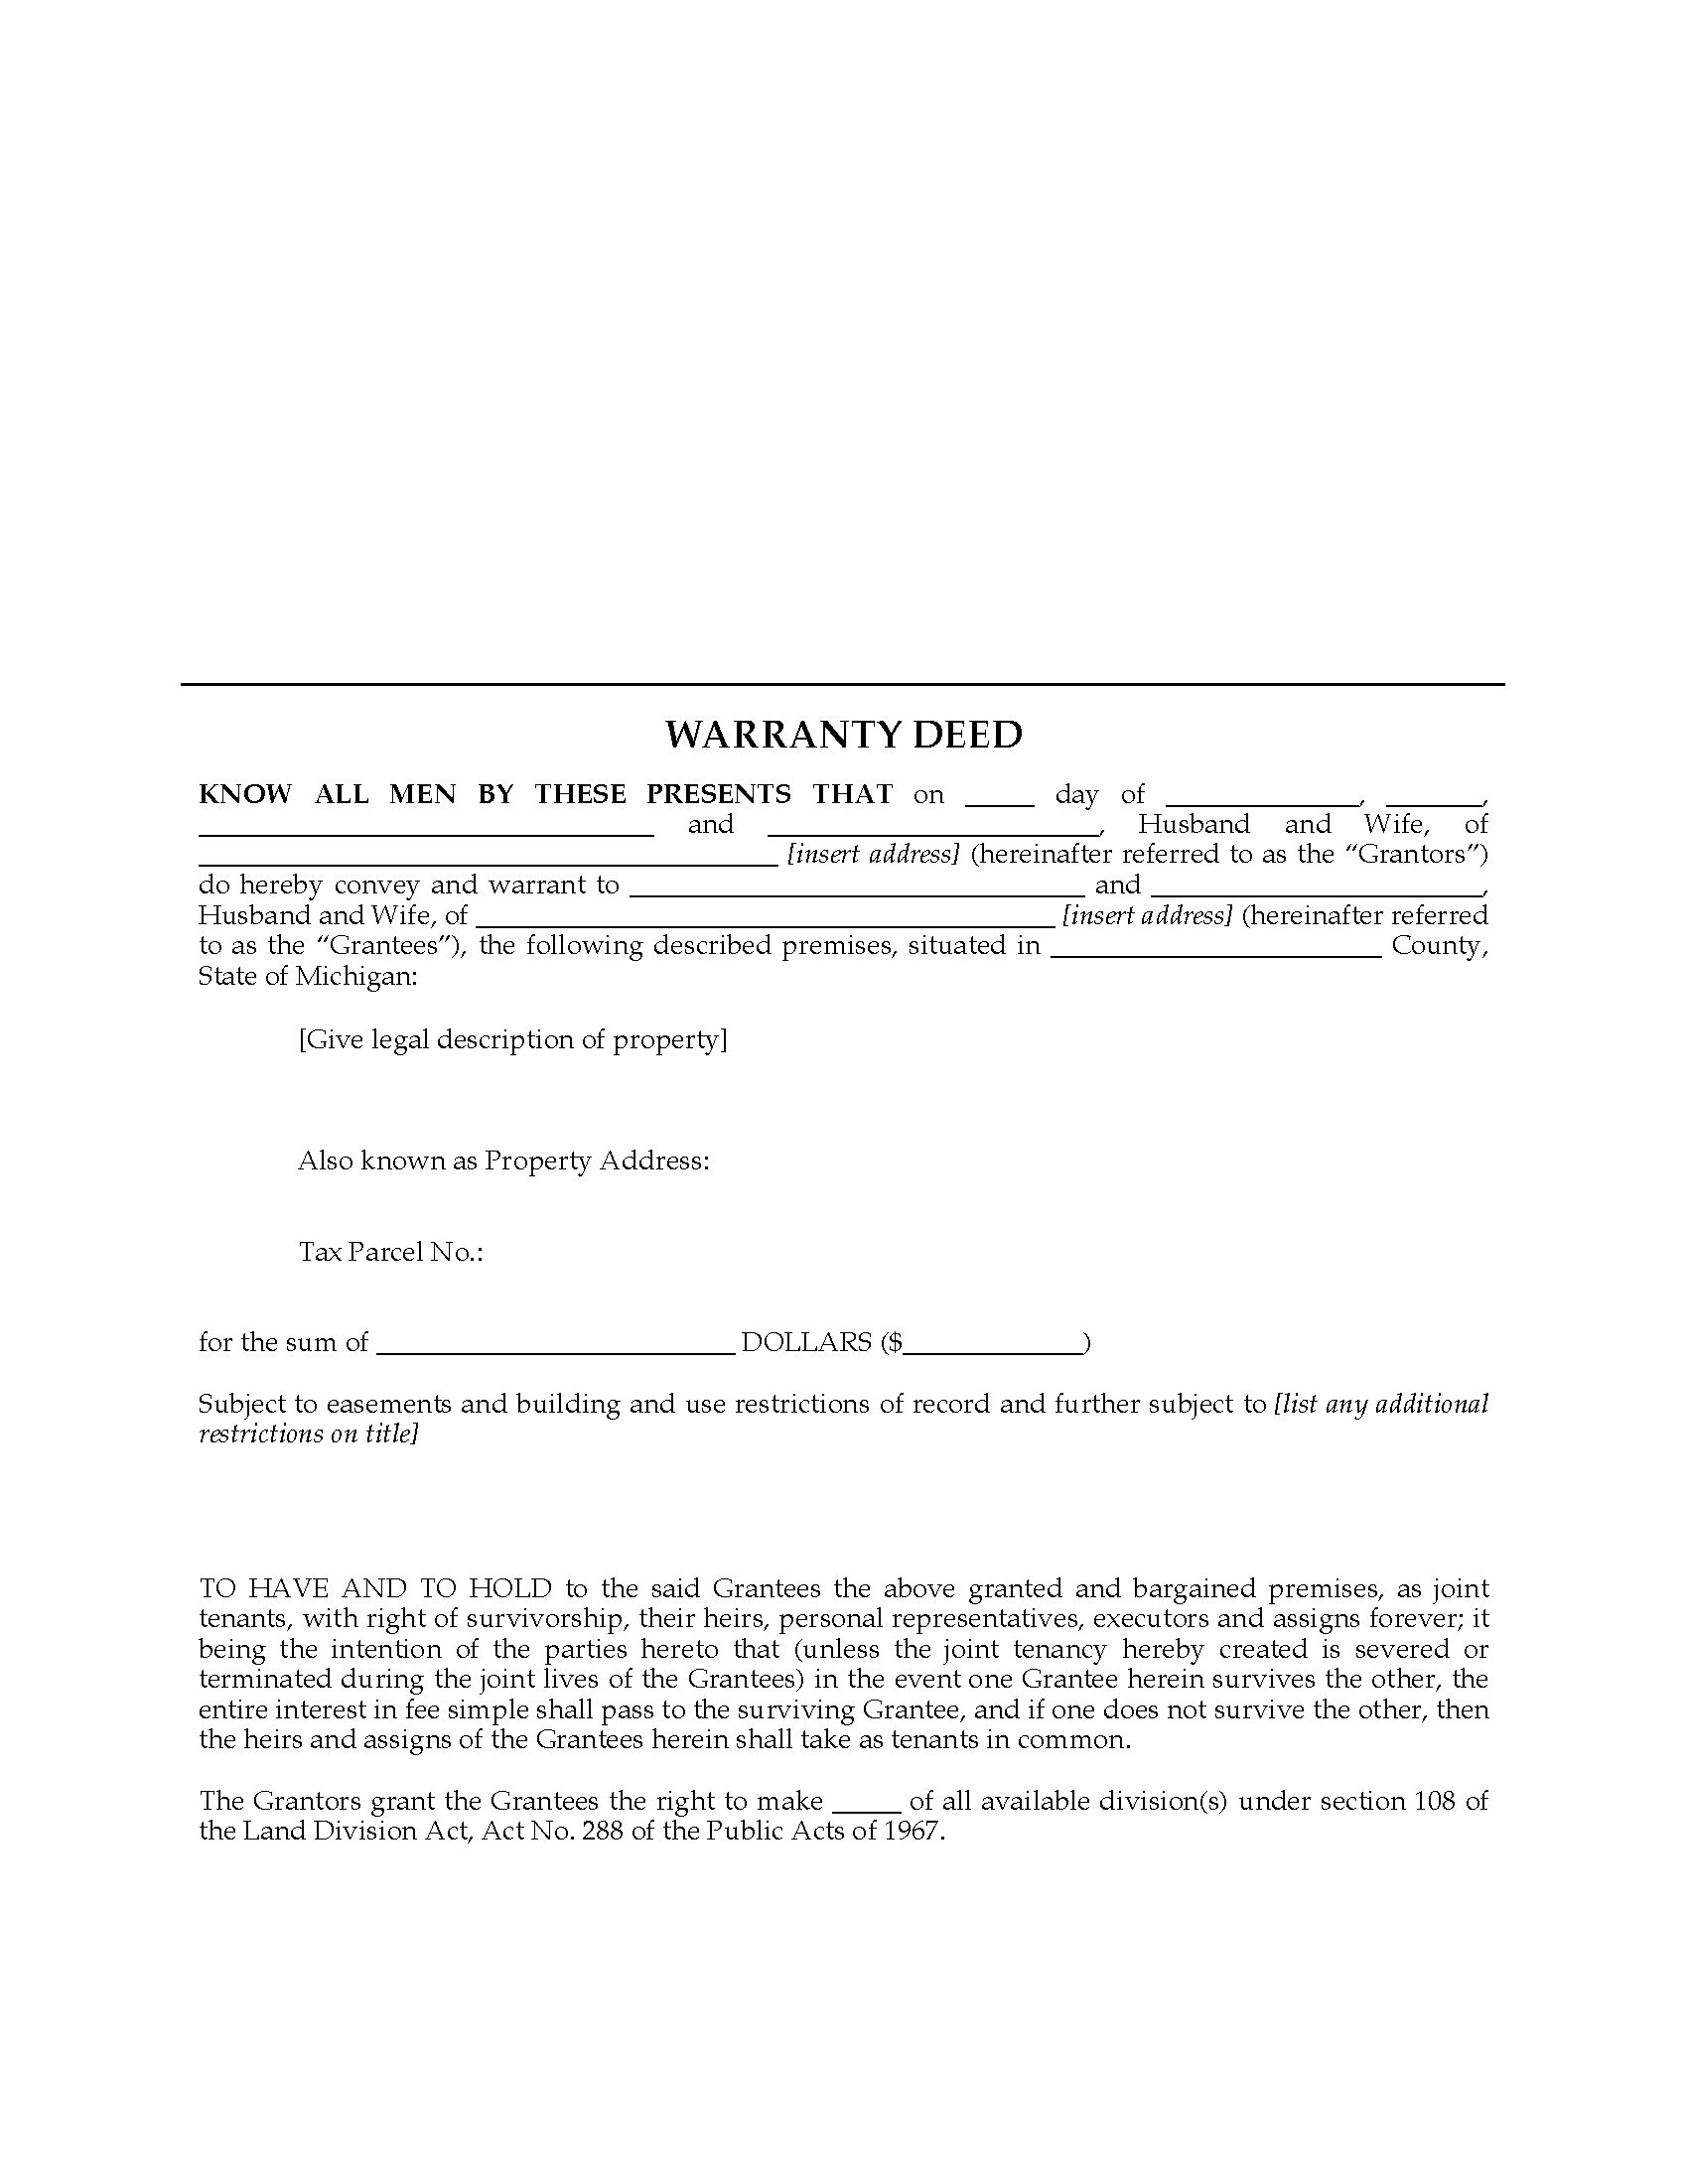 Michigan Warranty Deed For Joint Ownership Legal Forms And Business Templates Megadox Com